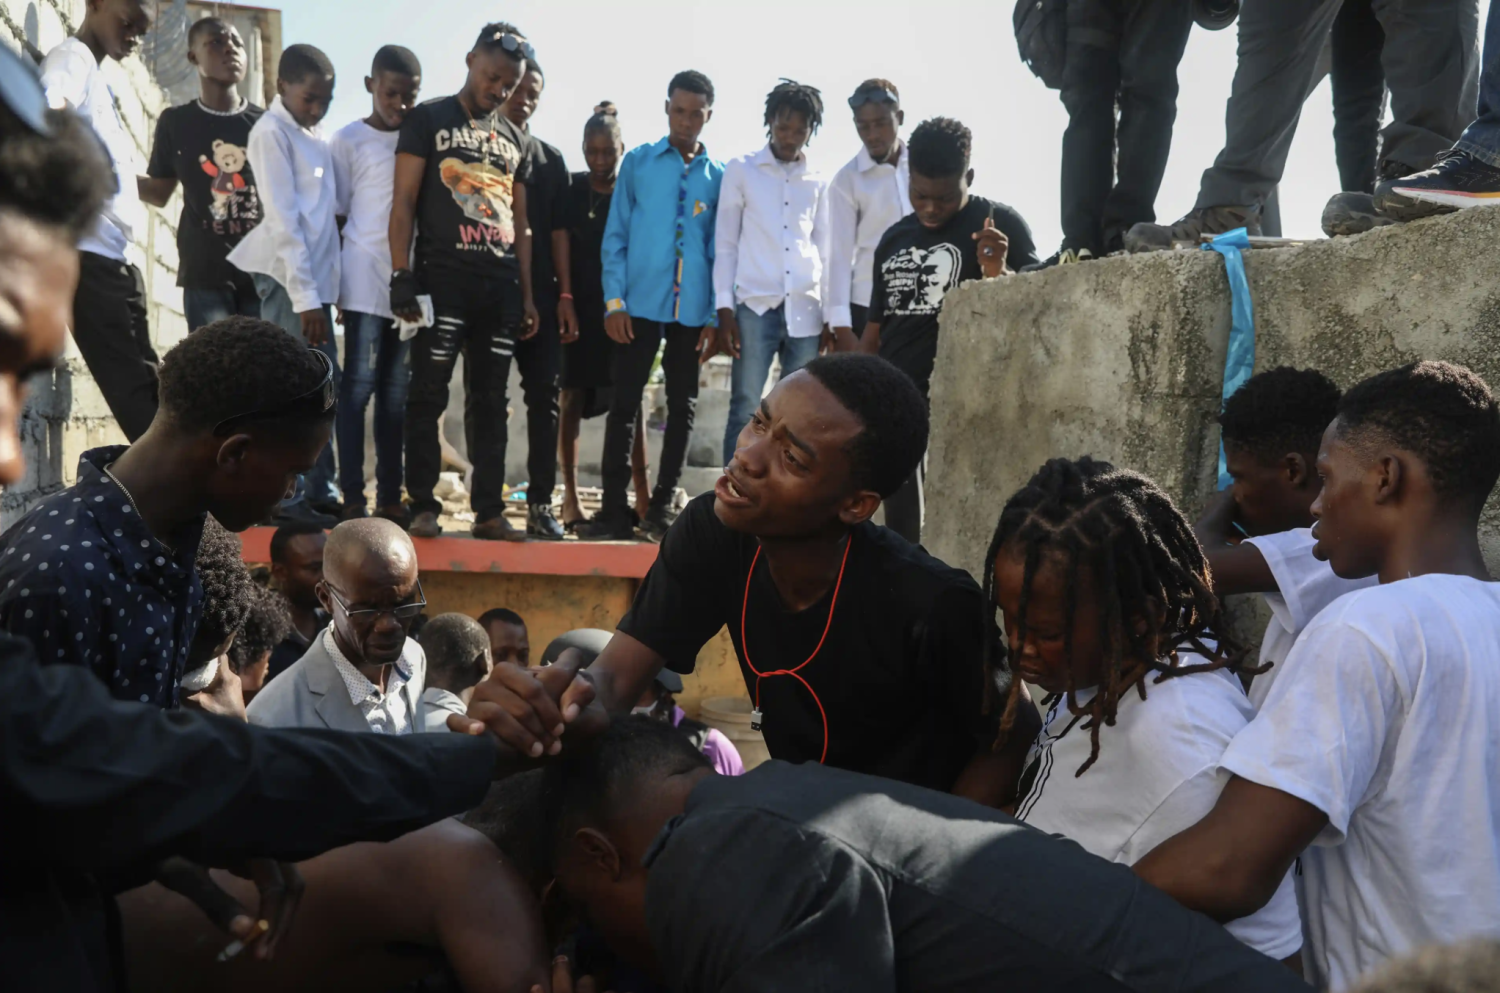 grieve the death of a teenager killed by a stray bullet during clashes between police and gang members in Port-au-Prince, Haiti, on Saturday. Photograph: Odelyn Joseph/AP